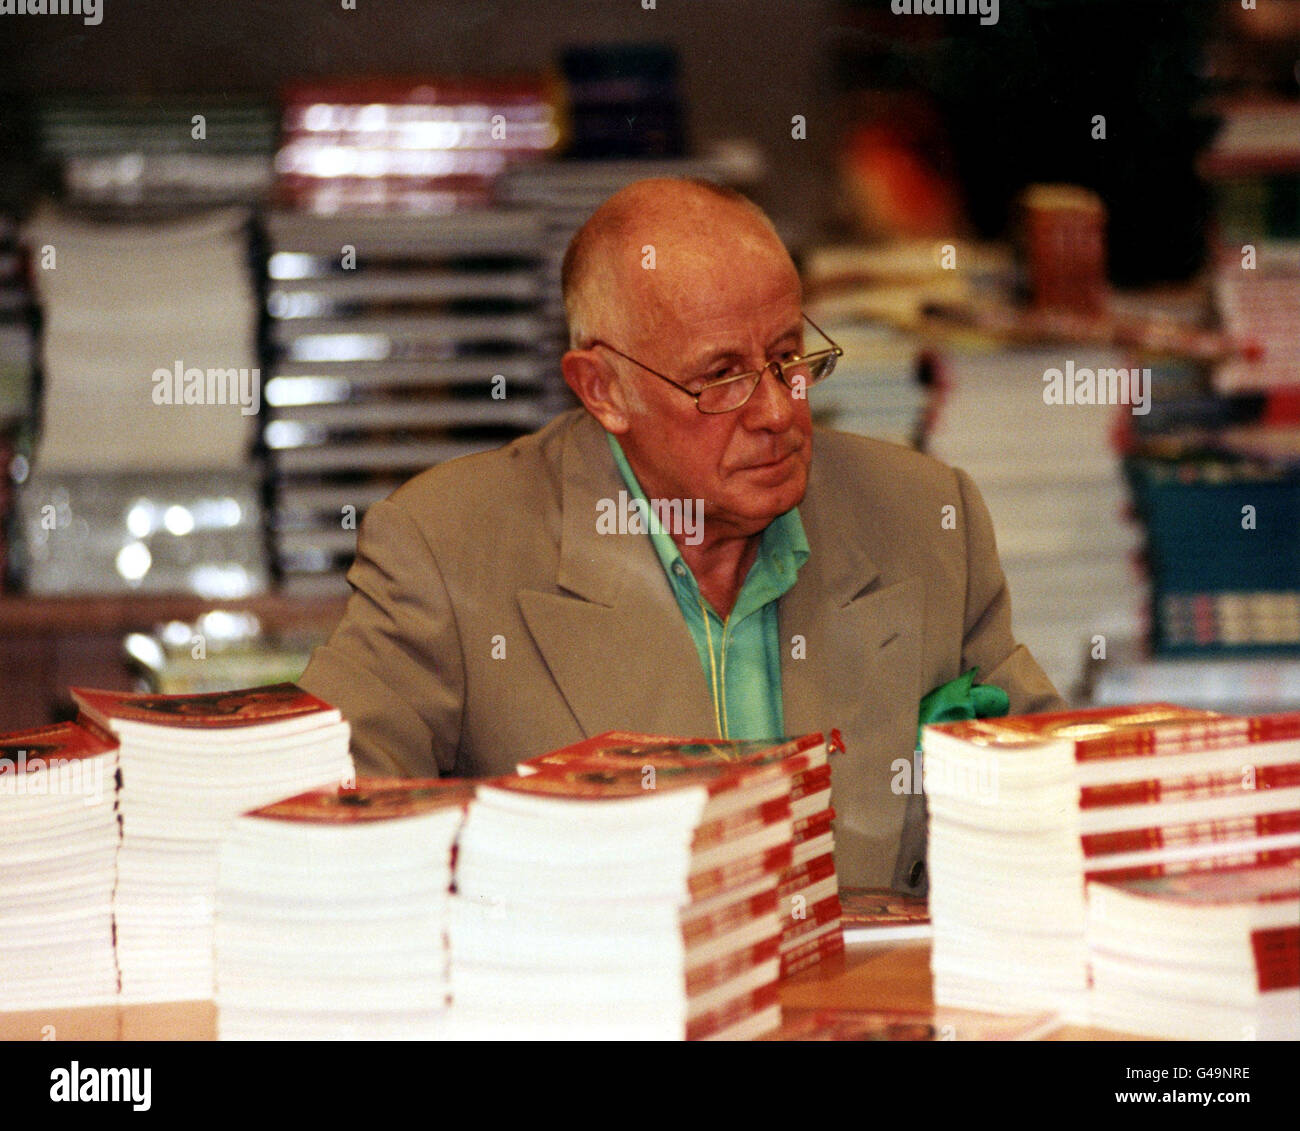 PA NEWS PHOTO 10/12/97 ACTOR RICHARD WILSON TAKING PART IN 'TRULY COSMIC' AT 'SELFRIDGES' IN LONDON. THE STORE AIMED TO RAISE A RECORD BREAKING SUM BY DONATING 10 PER CENT OF EVERYTHING SOLD BETWEEN 7 AND 9:30 PM TO THE TERENCE HIGGINS TRUST, BRITAIN'S LEADING AIDS CHARITY. Stock Photo